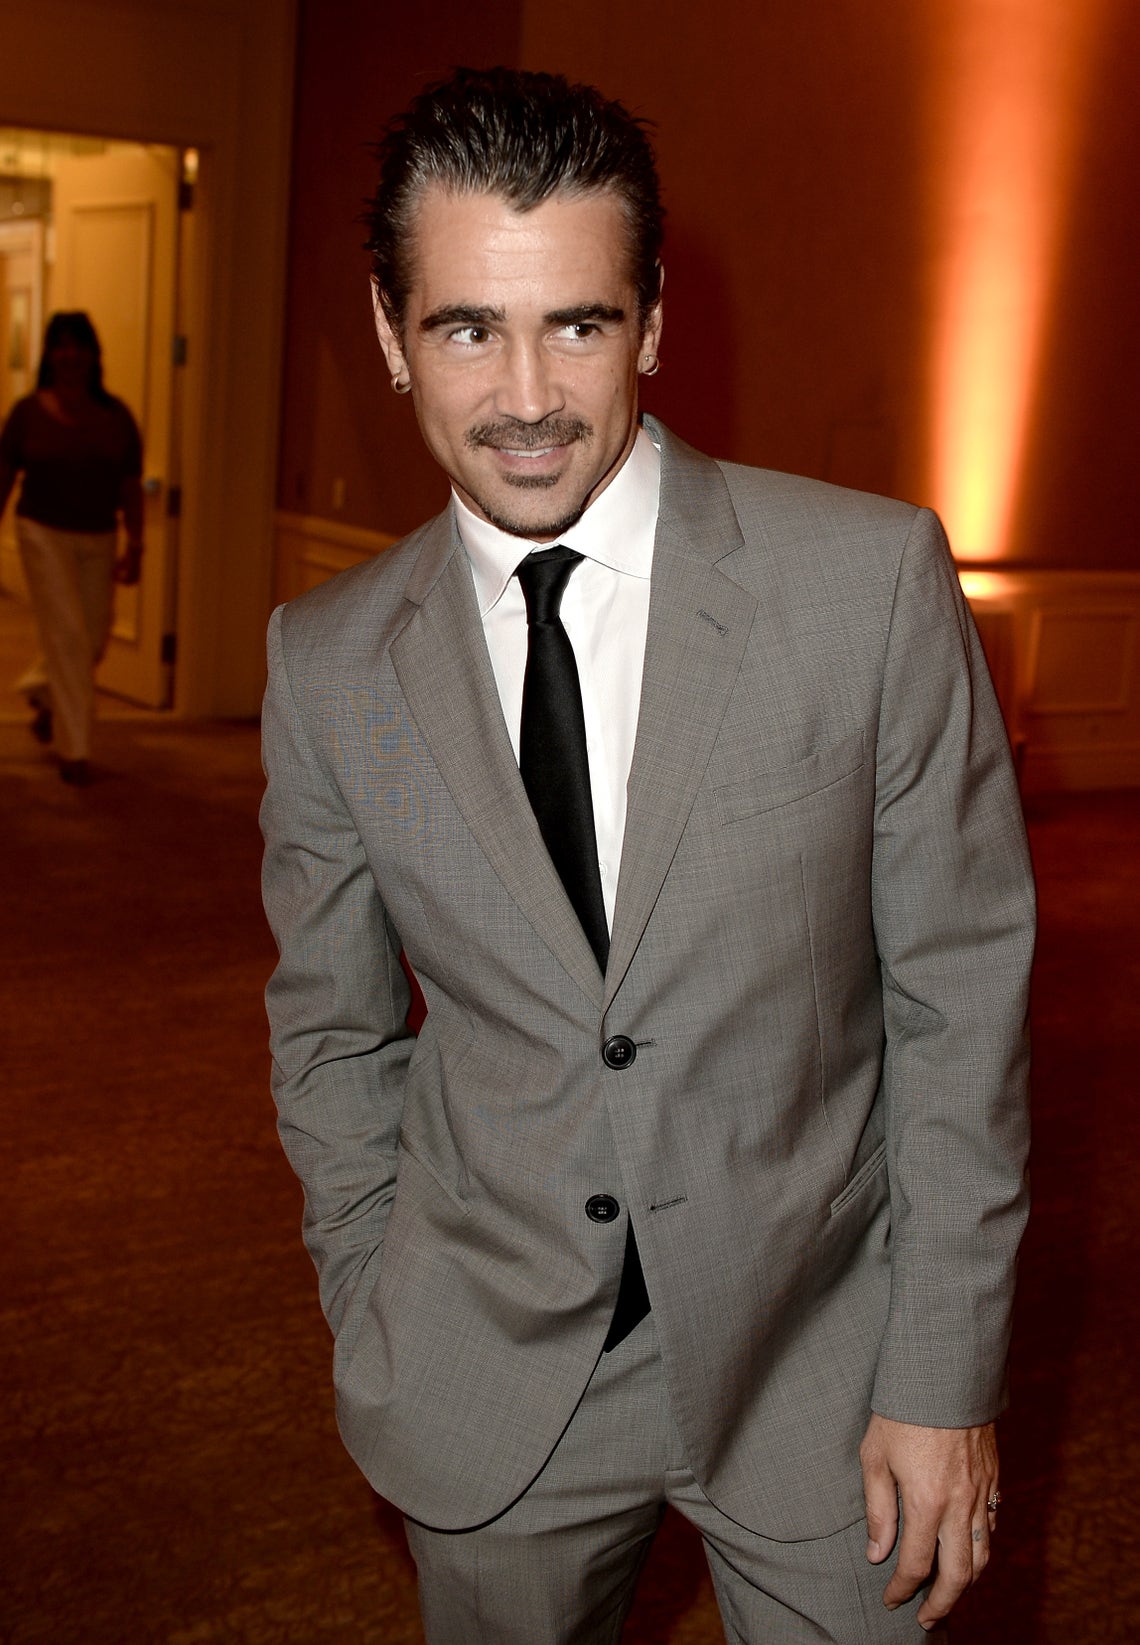 brittany van beek recommends nicole narian colin farrell pic